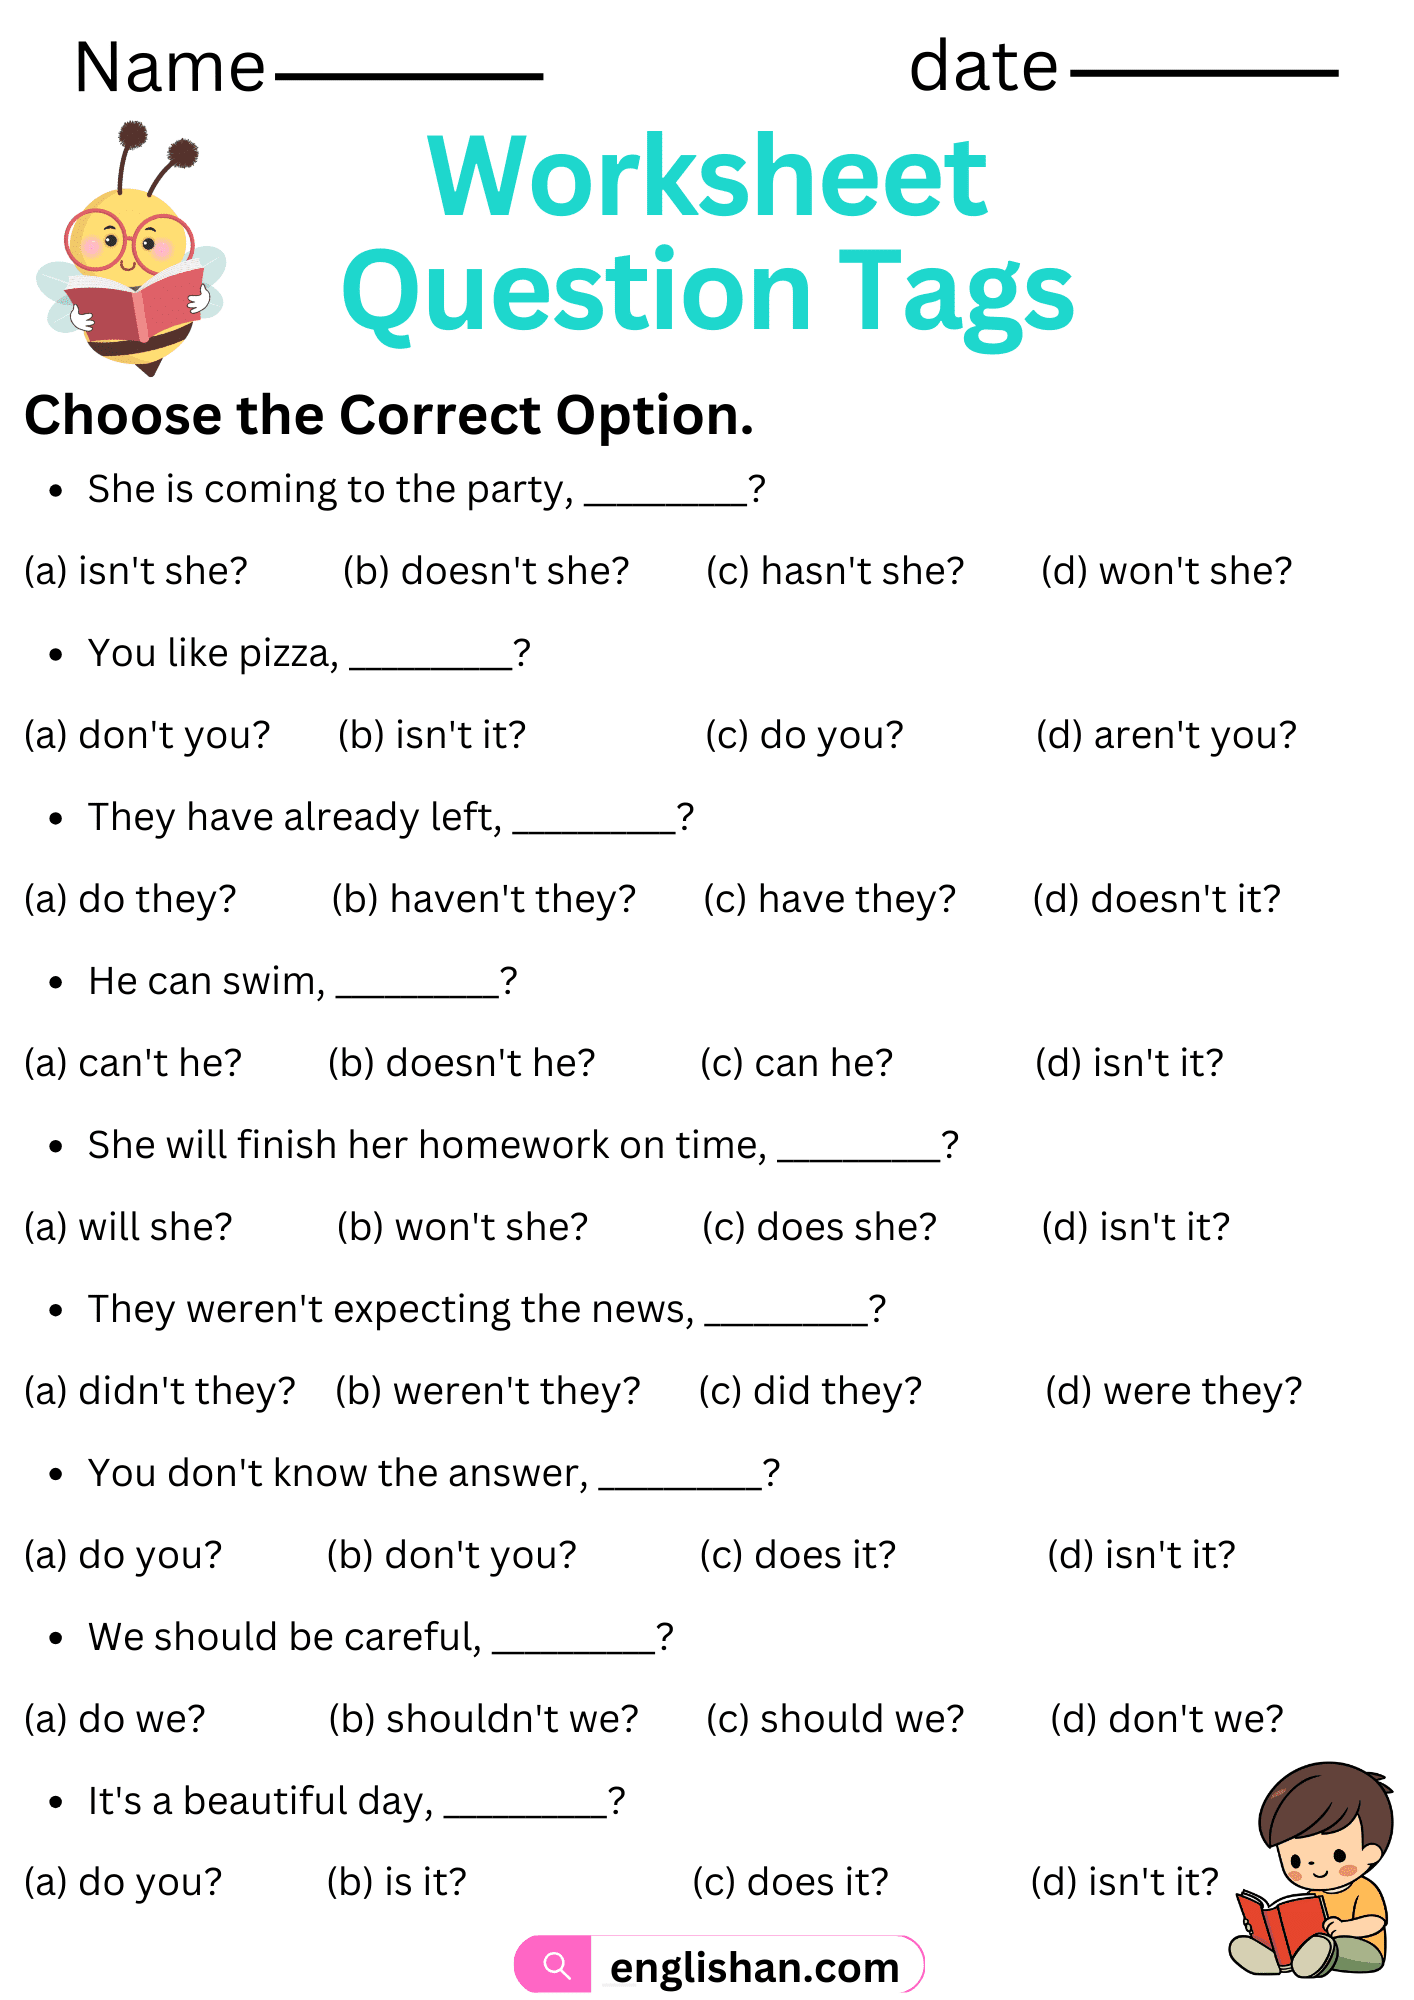 Worksheet Question Tags and Exercises. Match the Sentences using Question Tags Worksheets. Question Tags Worksheets and Exercises